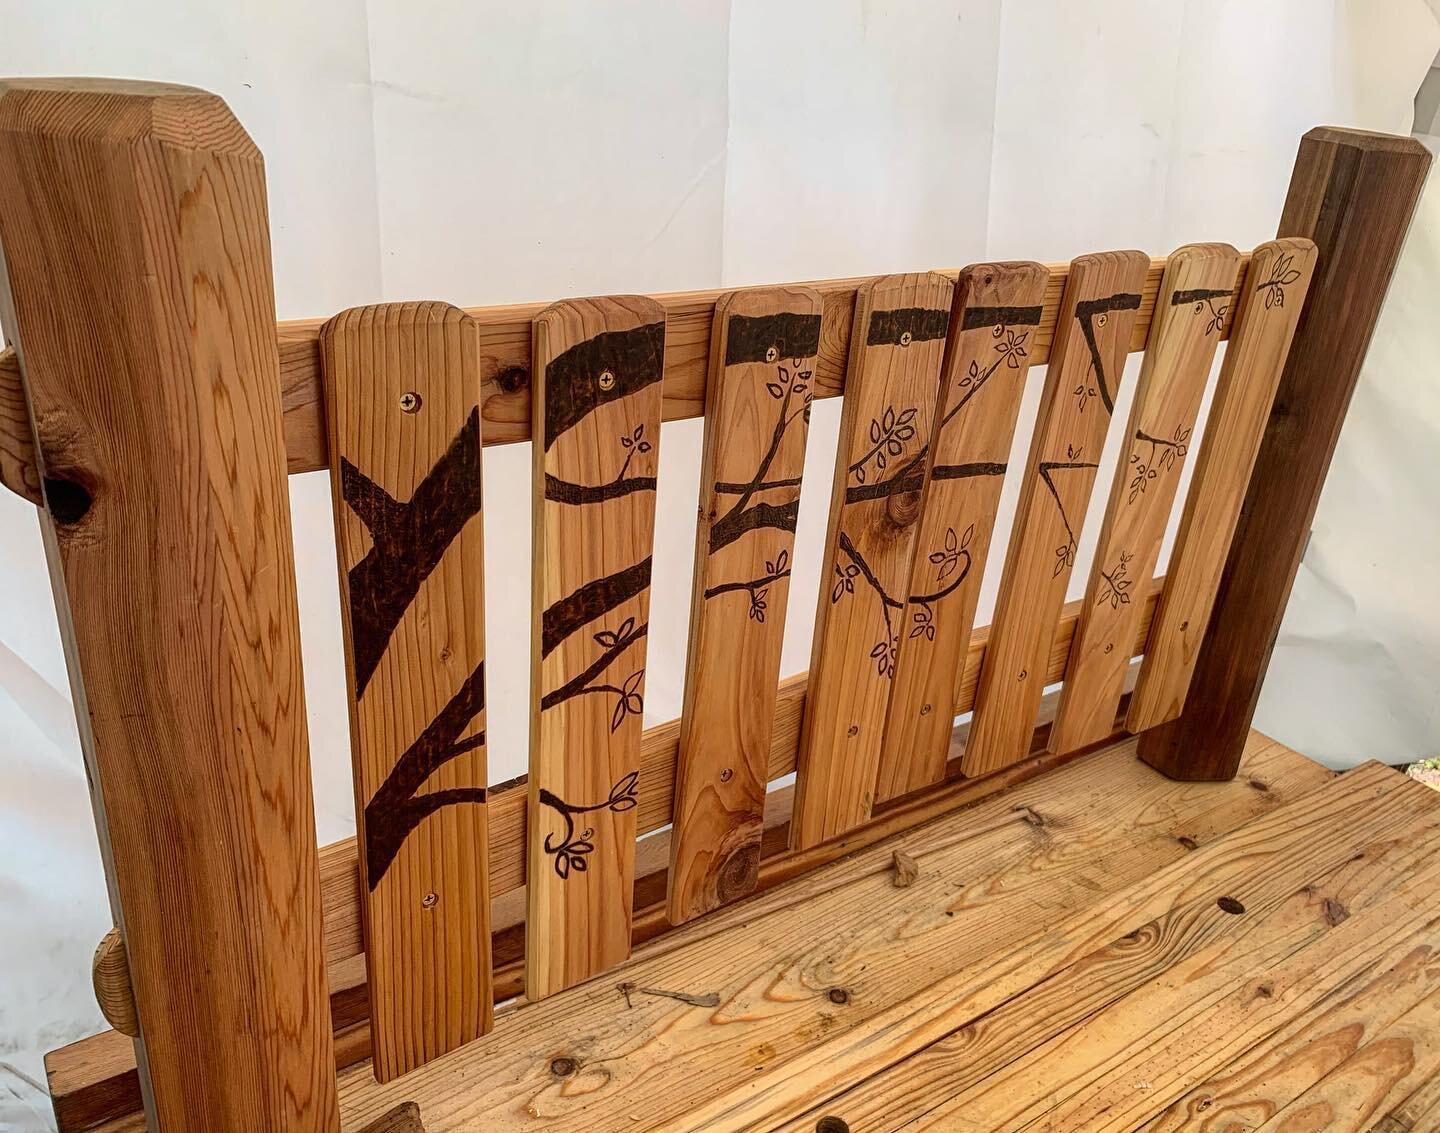 Our Montessori schools have a tradition of walking through gates to symbolize a transition into a new journey. Since we couldn&rsquo;t be at school with our normal gates I took the opportunity to teach my lovely wife some mortise and tenon joinery in